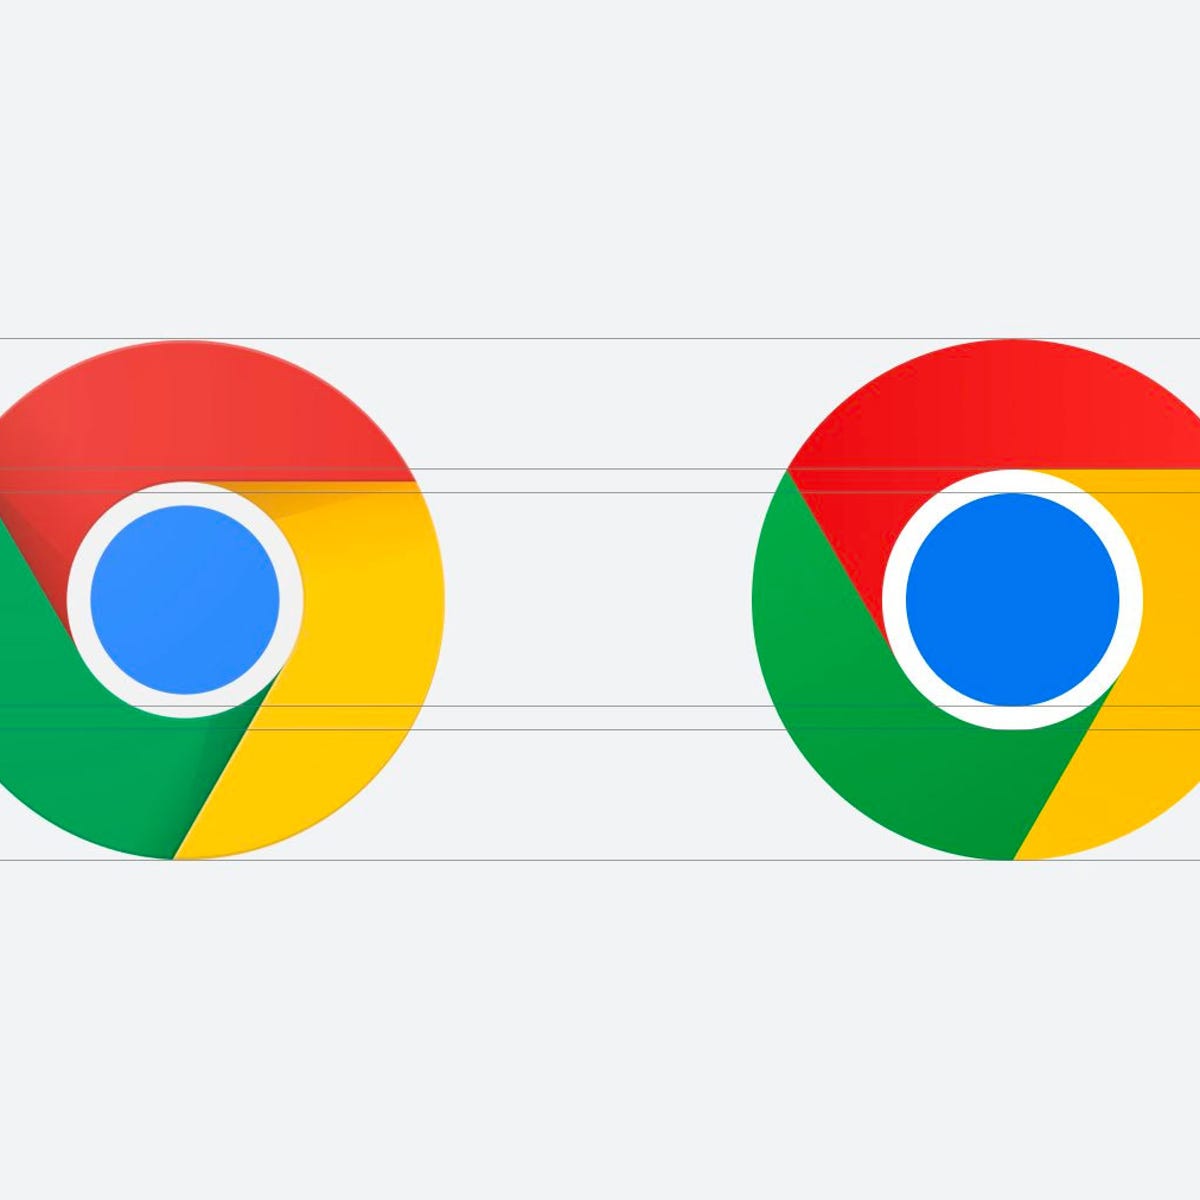 Google Chrome logo gets simpler and brighter, the first change in 8 years -  CNET